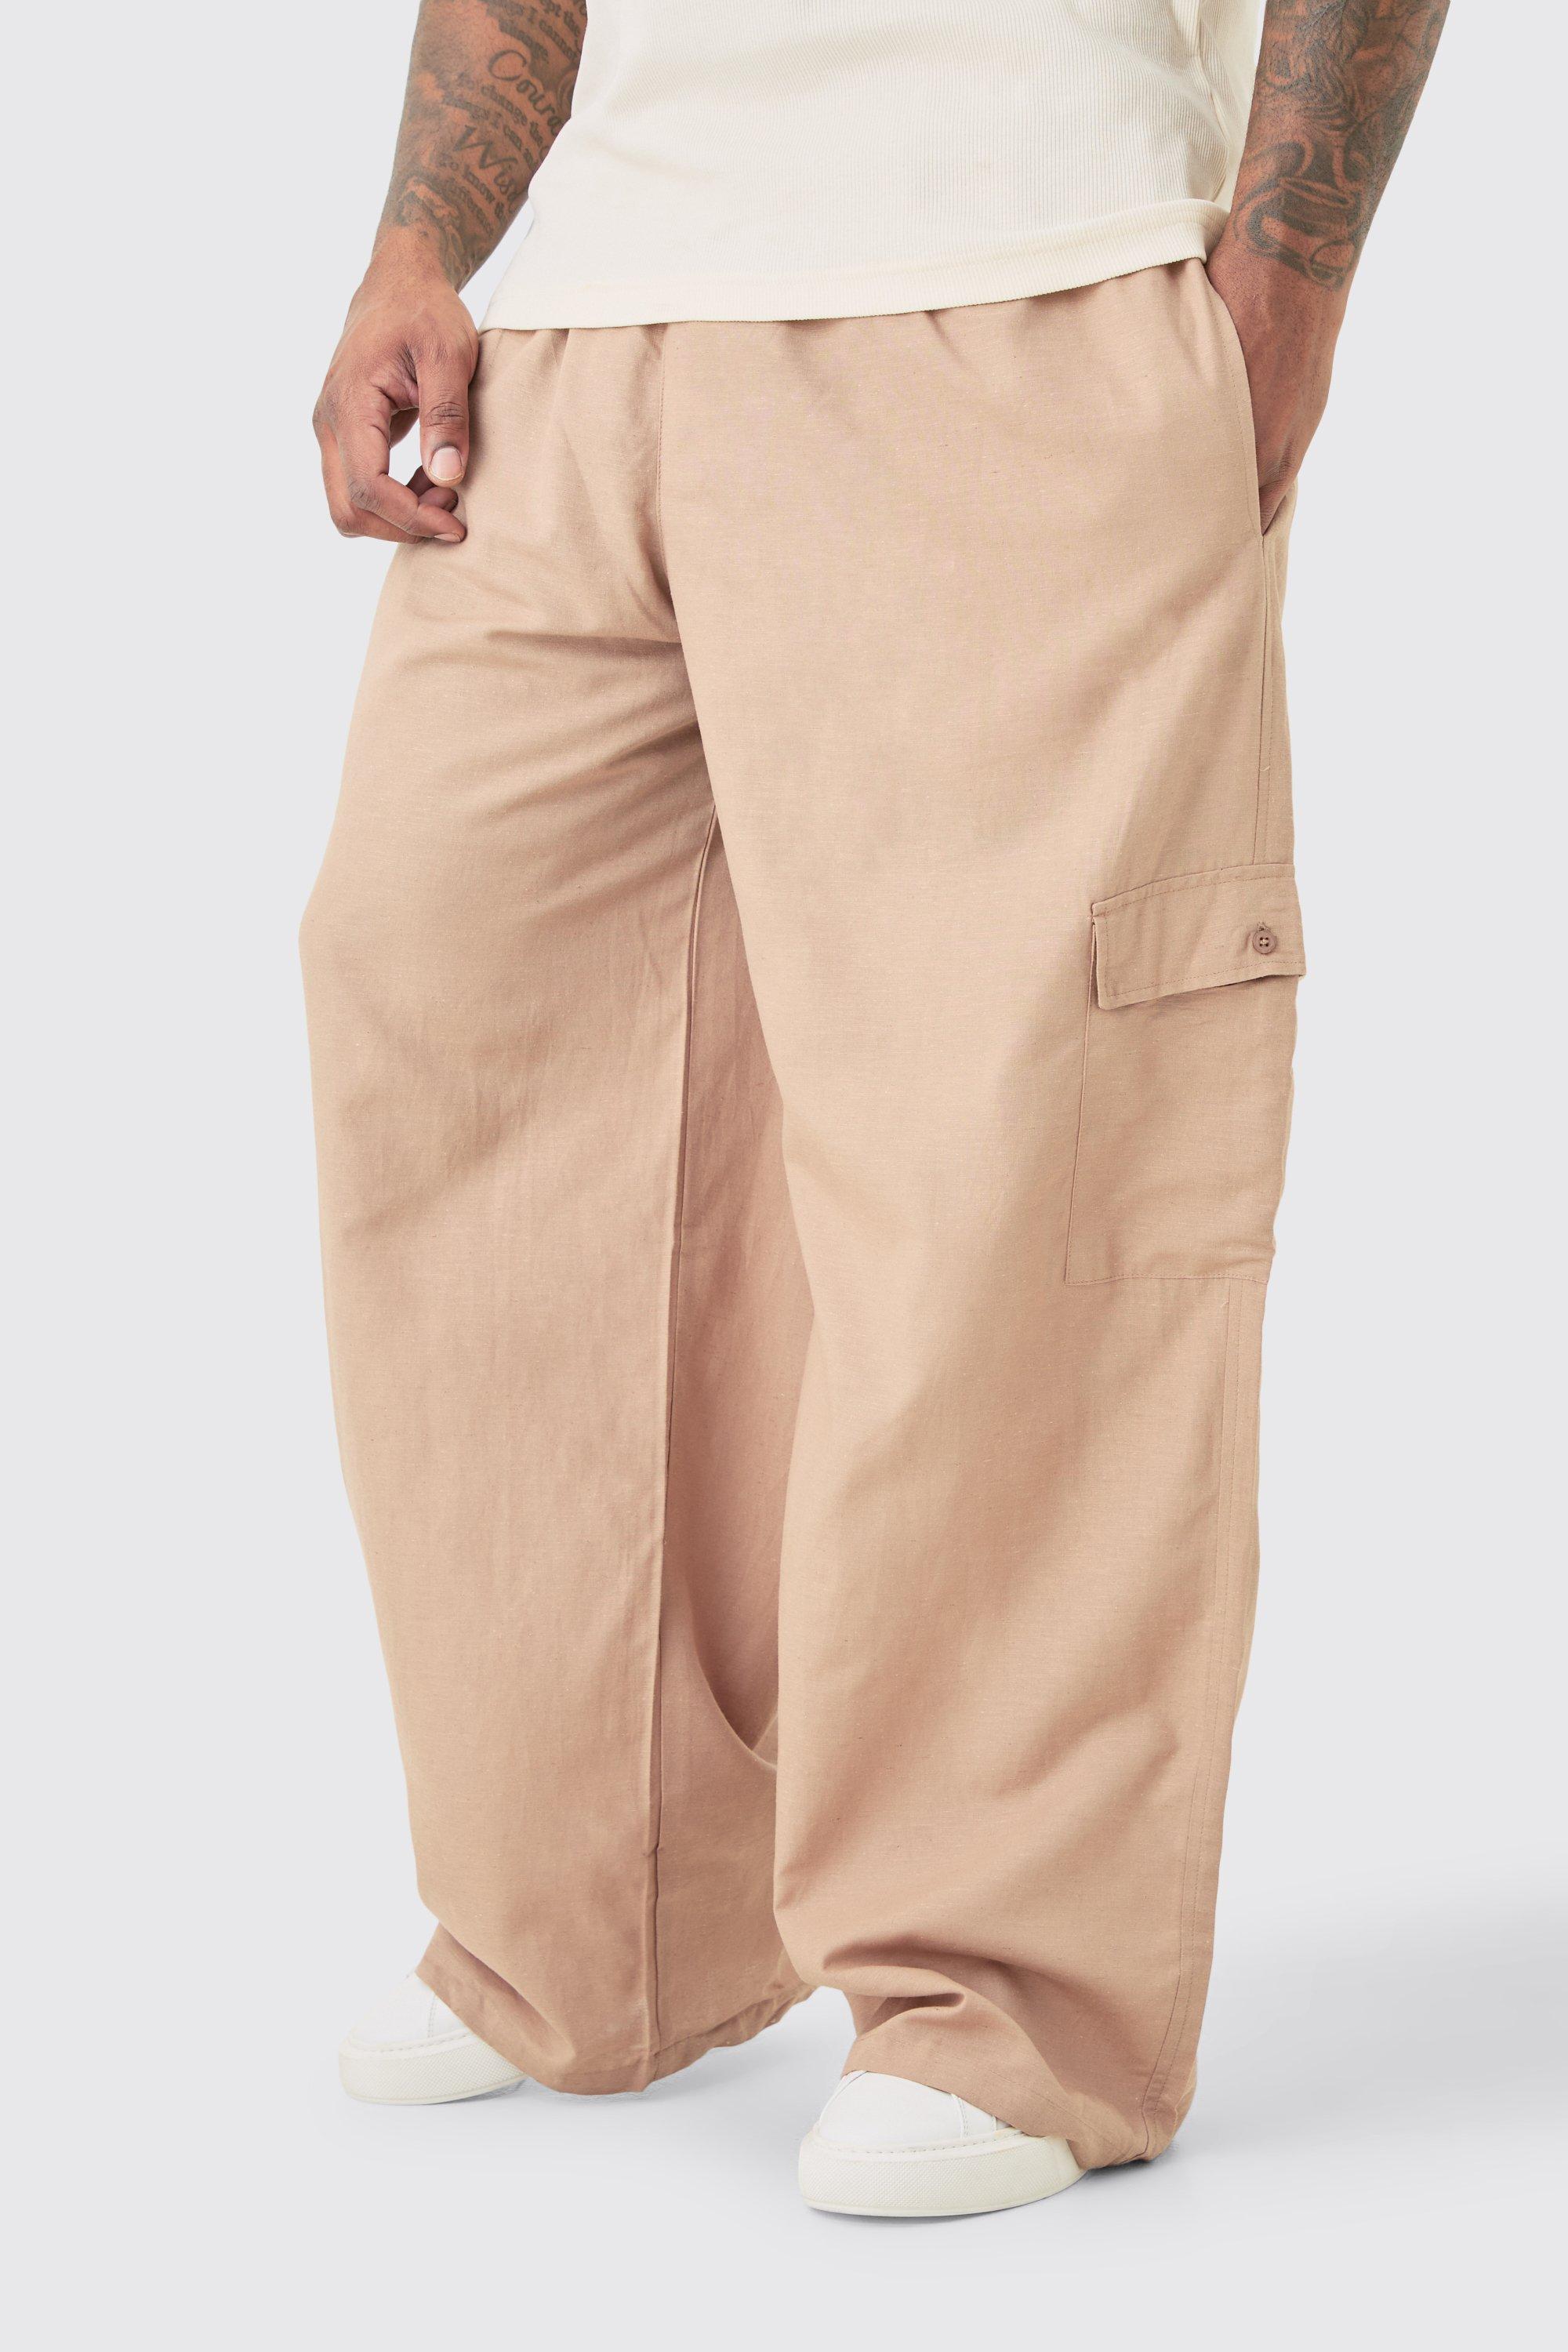 Image of Plus Elasticated Waist Oversized Linen Cargo Trouser In Taupe, Beige